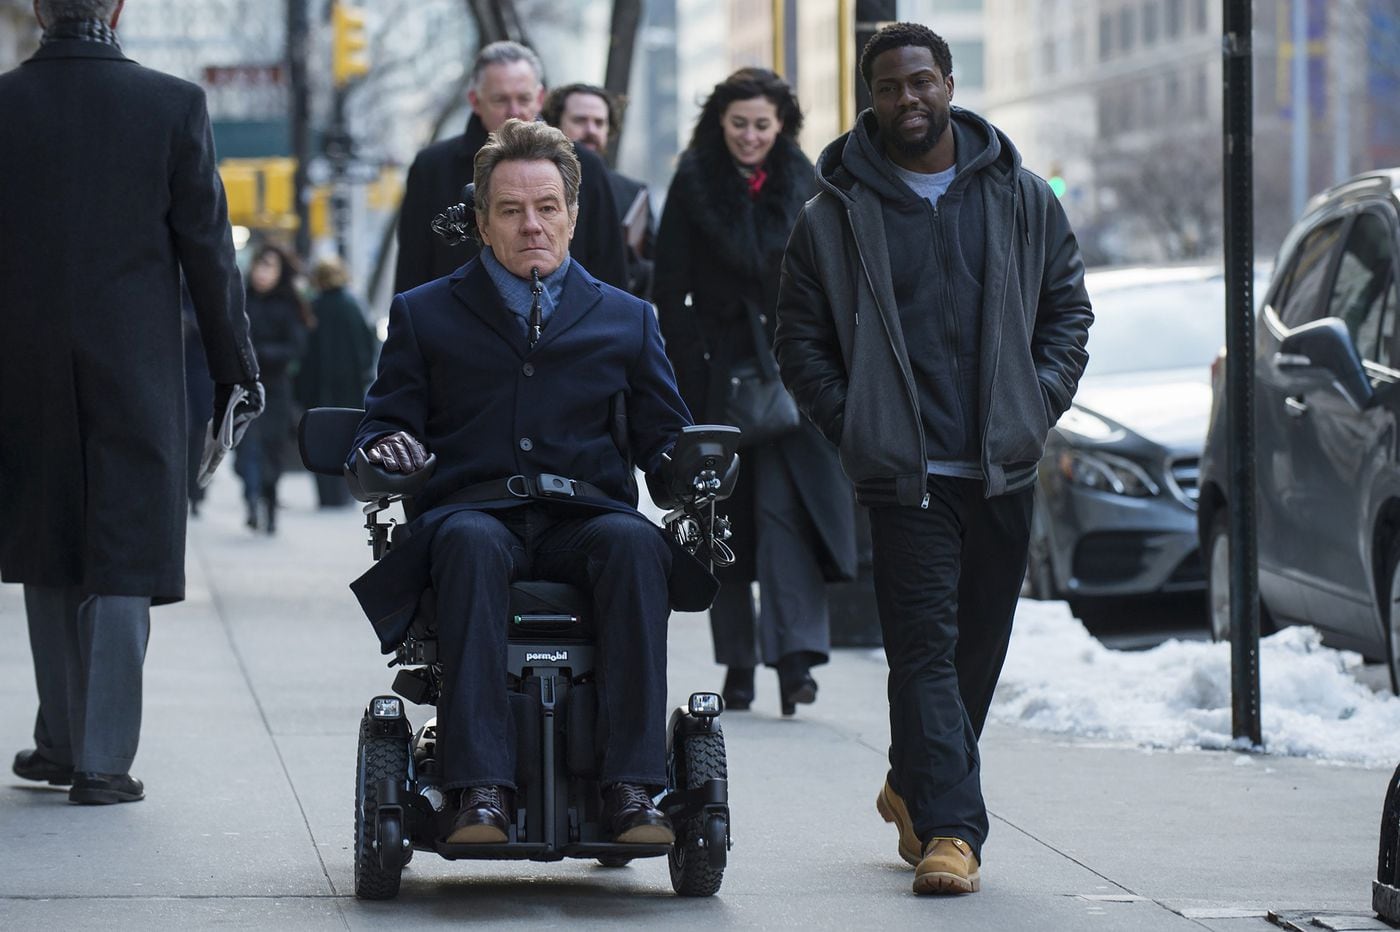 Philly Filmed The Upside Starring Kevin Hart And Bryan Cranston Gets First Trailer